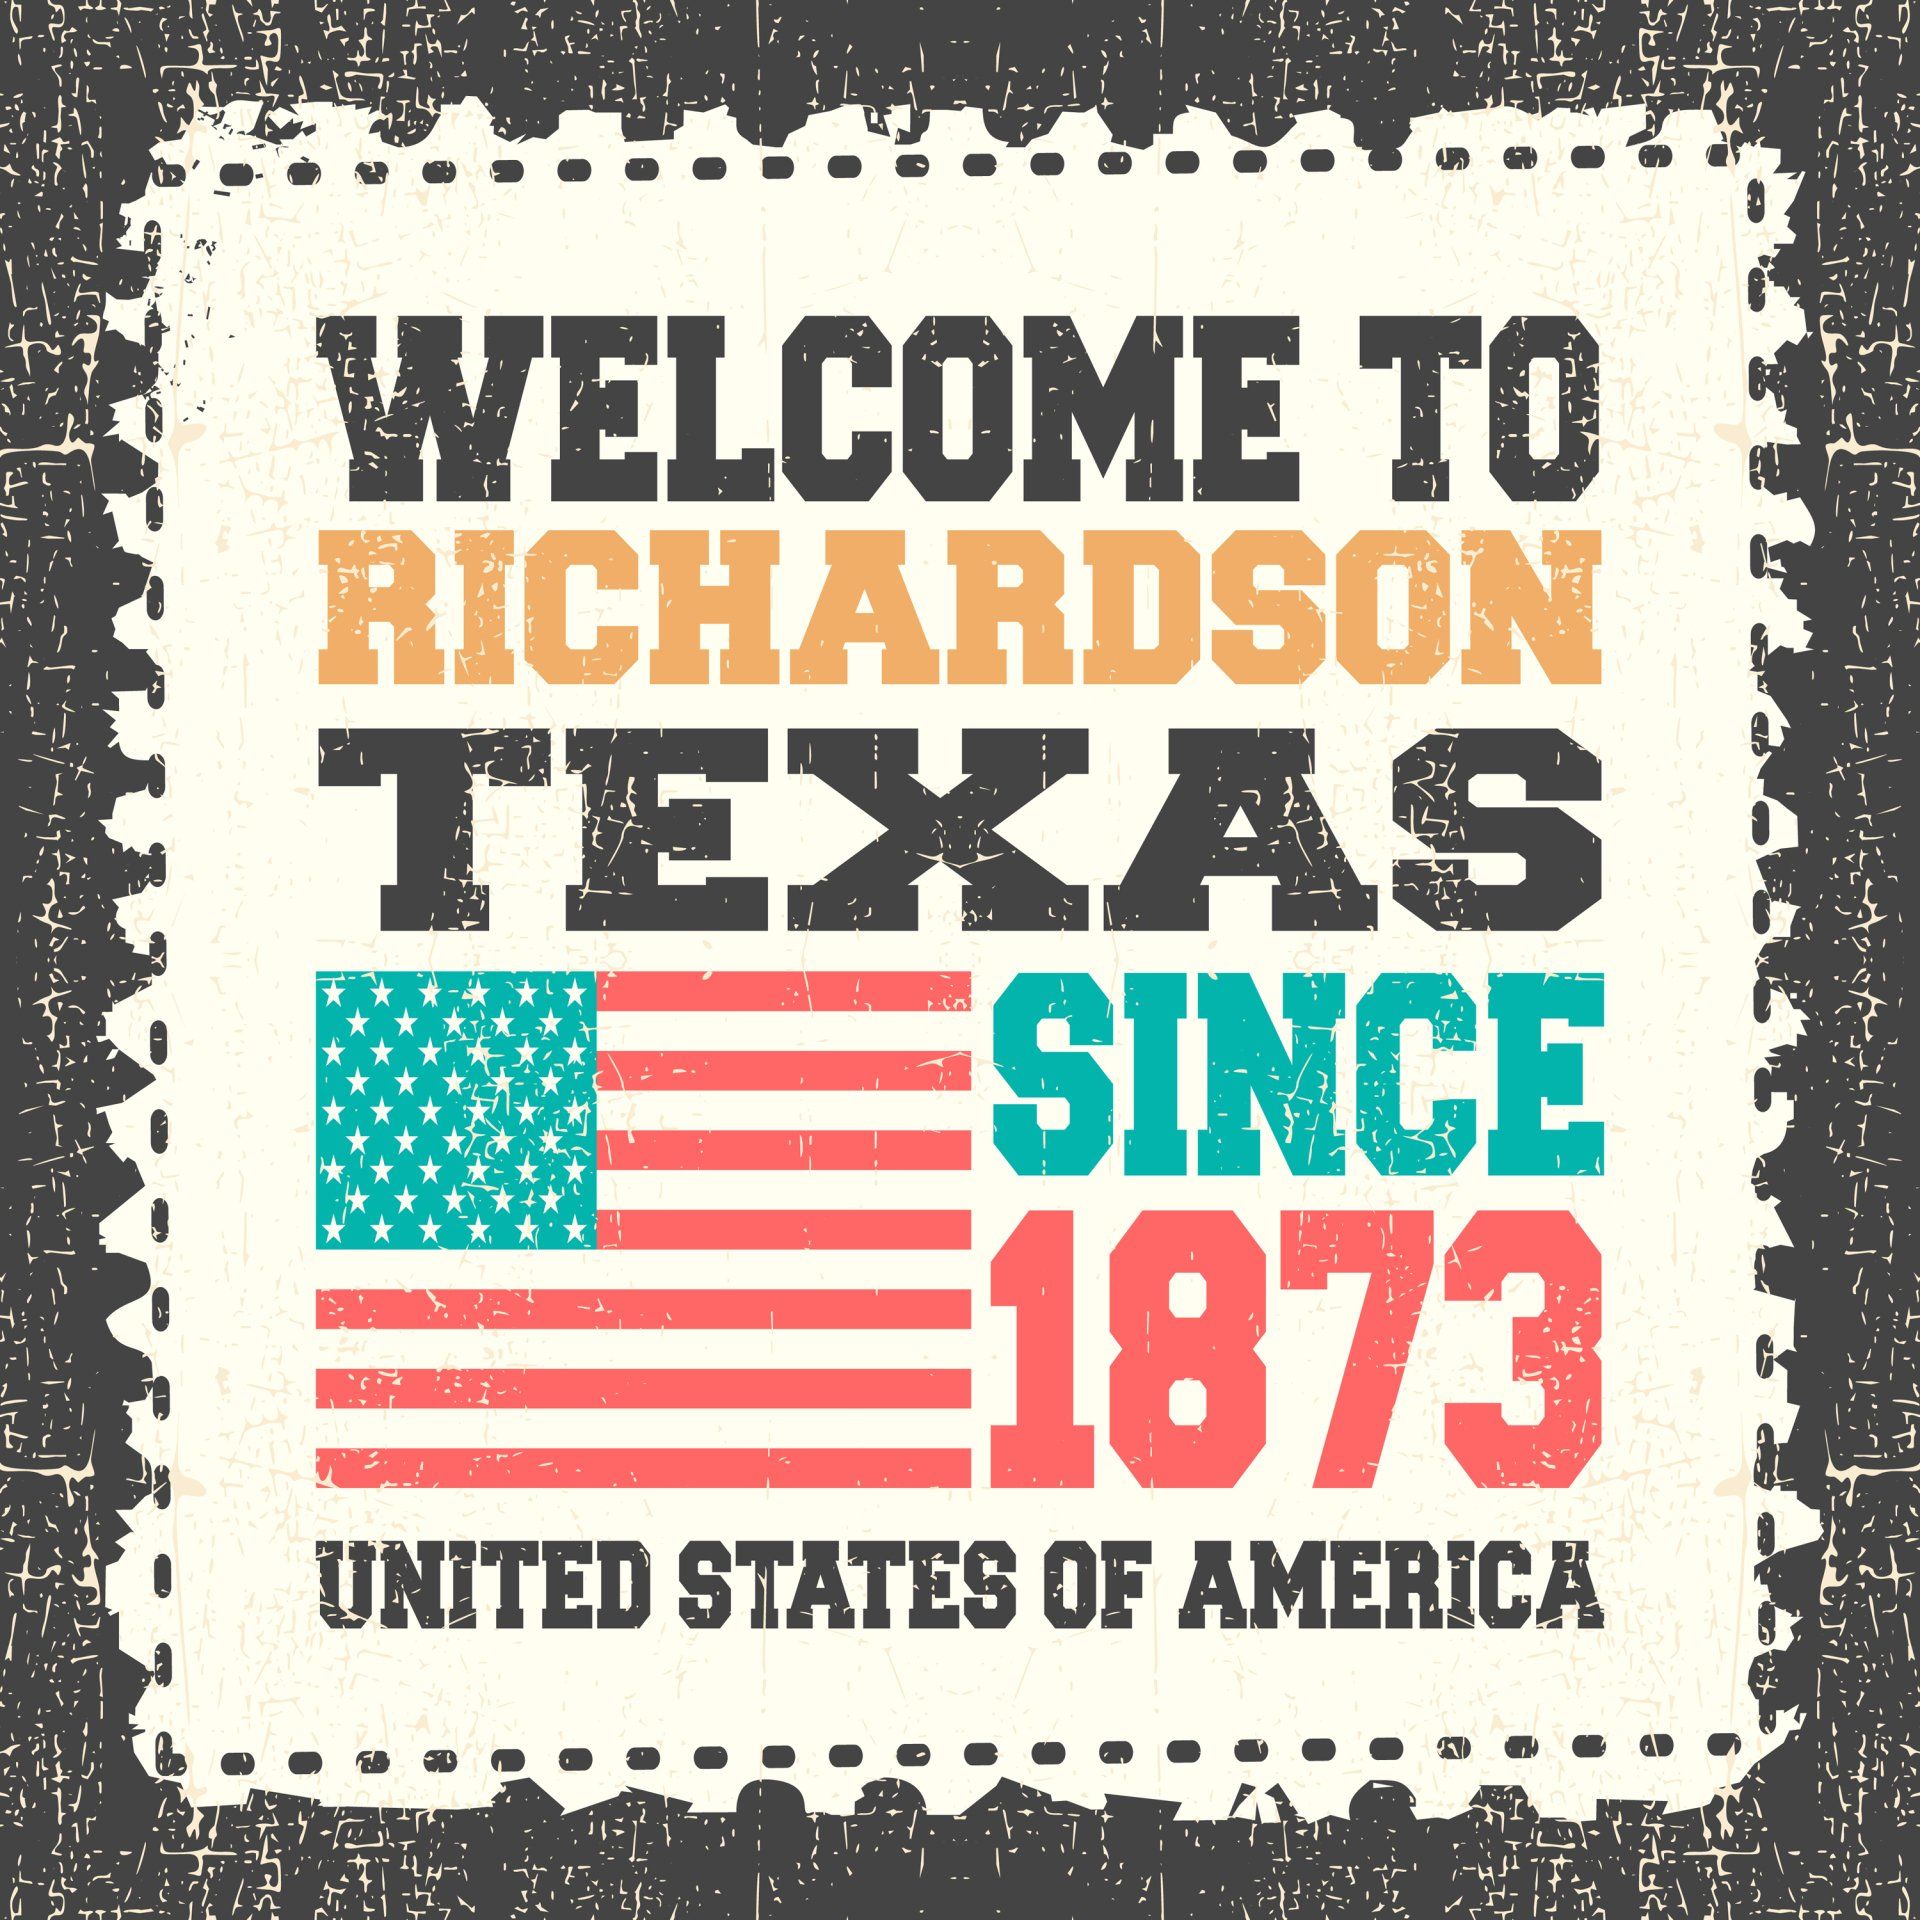 Welcome to richardson texas since 1873 united states of america